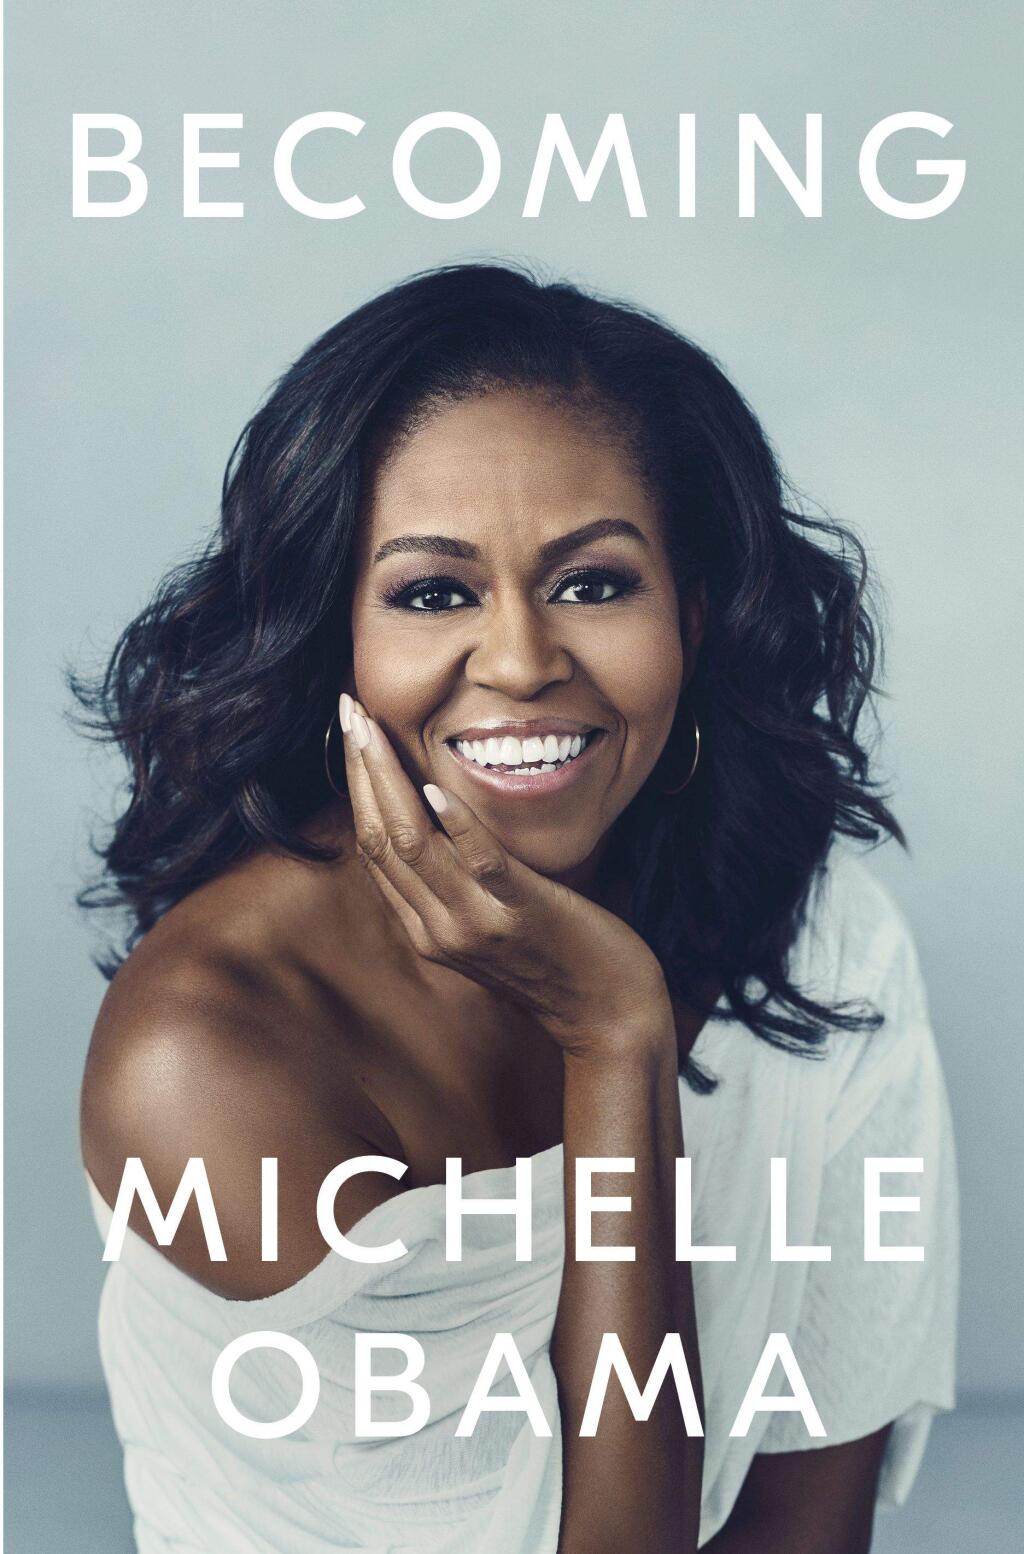 Michelle Obama's memoir is once again No. 1 on the local bestselling fiction and nonfiction books list.